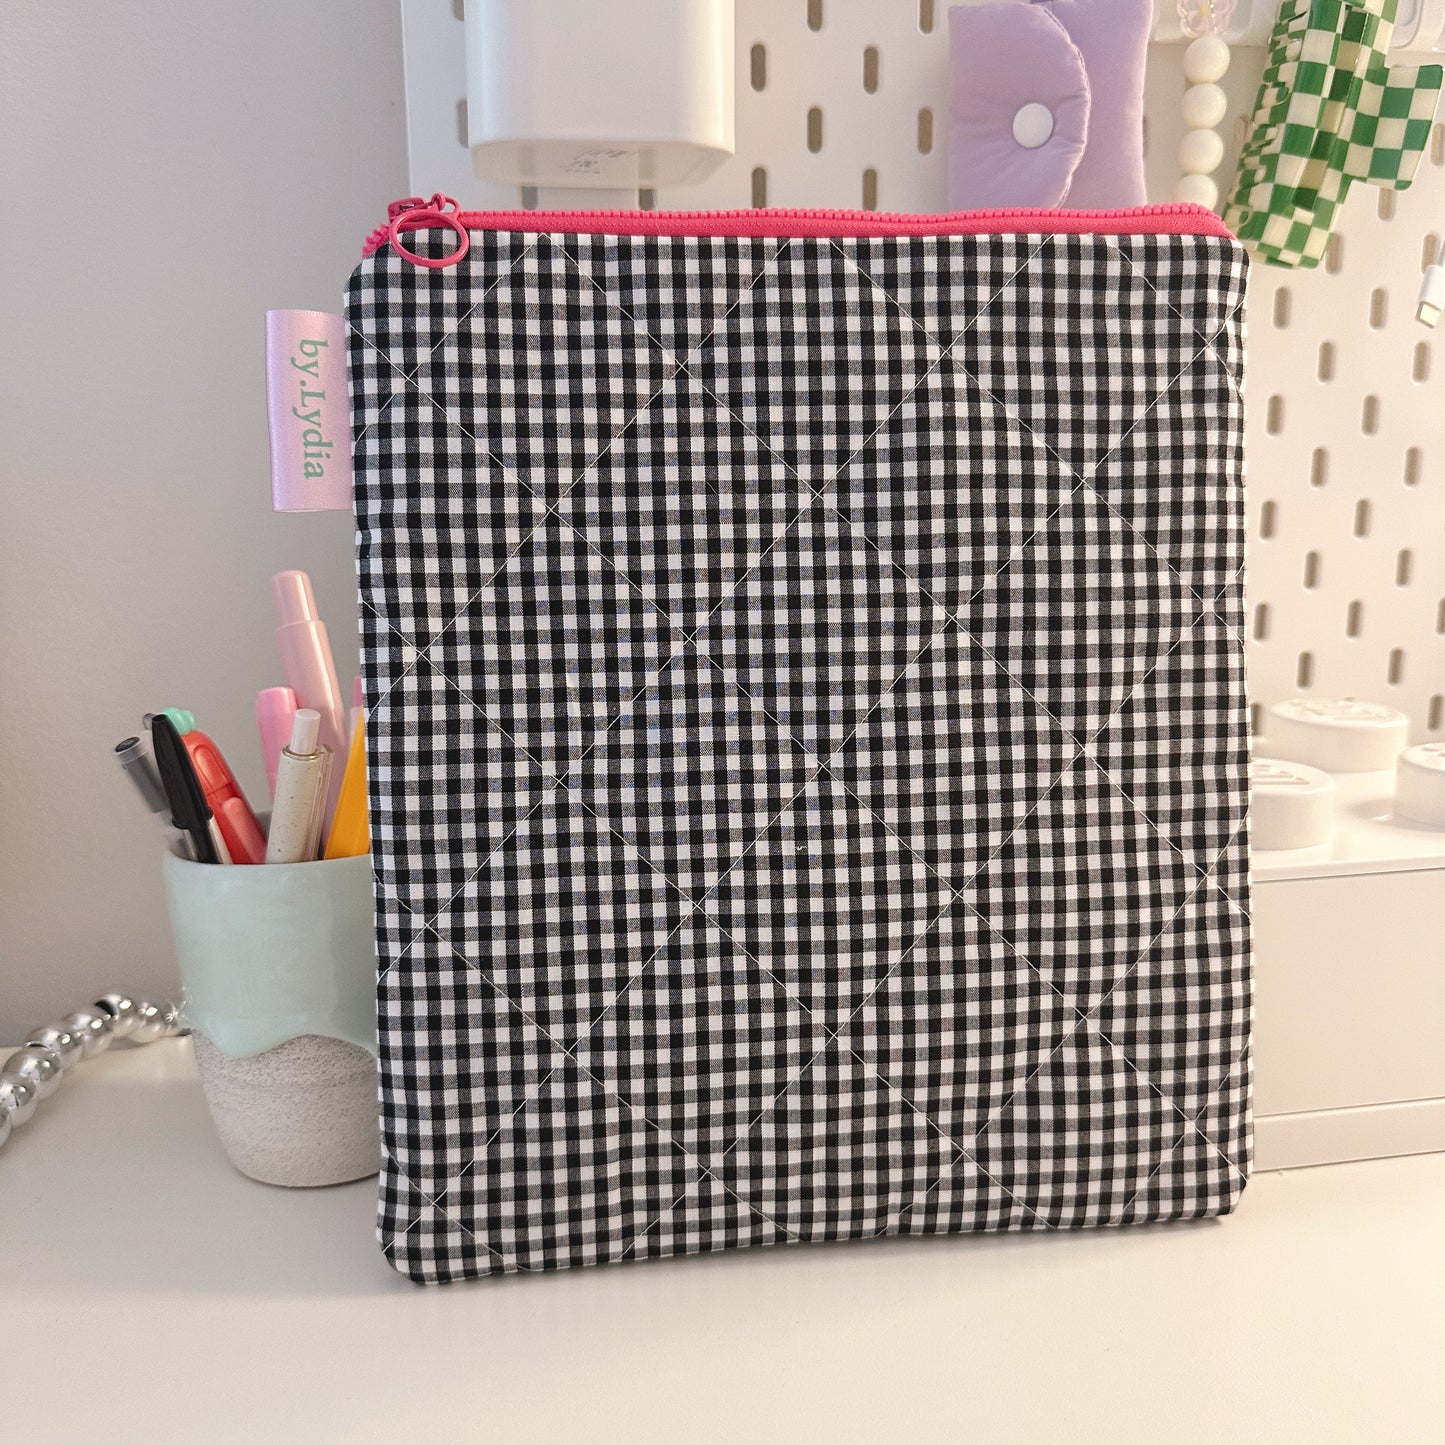 11" iPad Pouch - Black Gingham